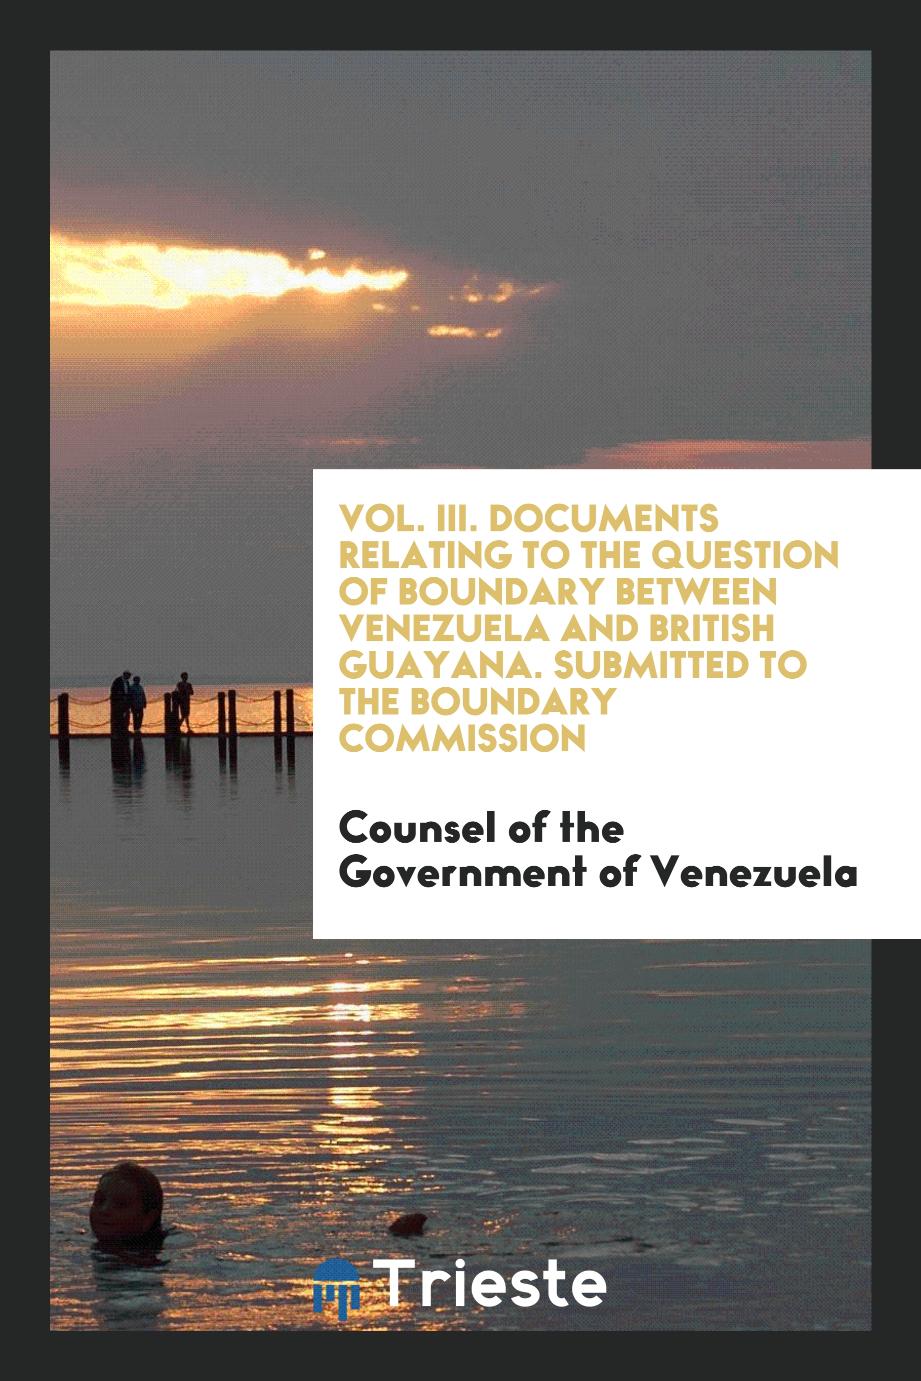 Counsel of the Government of Venezuela - Vol. III. Documents Relating to the Question of Boundary Between Venezuela and British Guayana. Submitted to the Boundary Commission